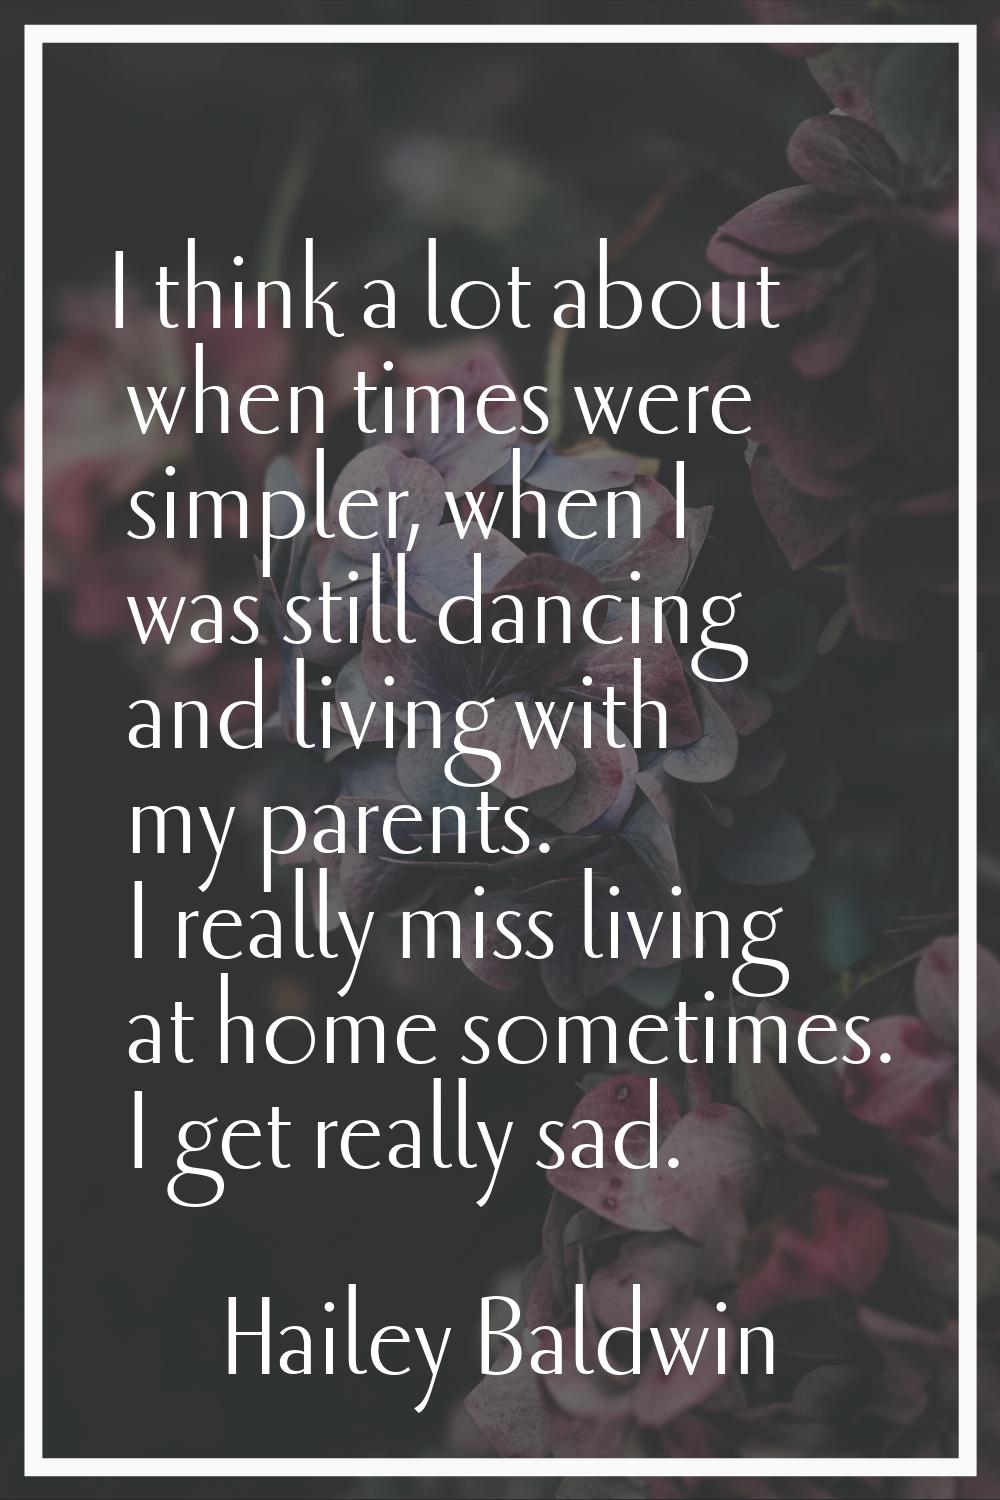 I think a lot about when times were simpler, when I was still dancing and living with my parents. I